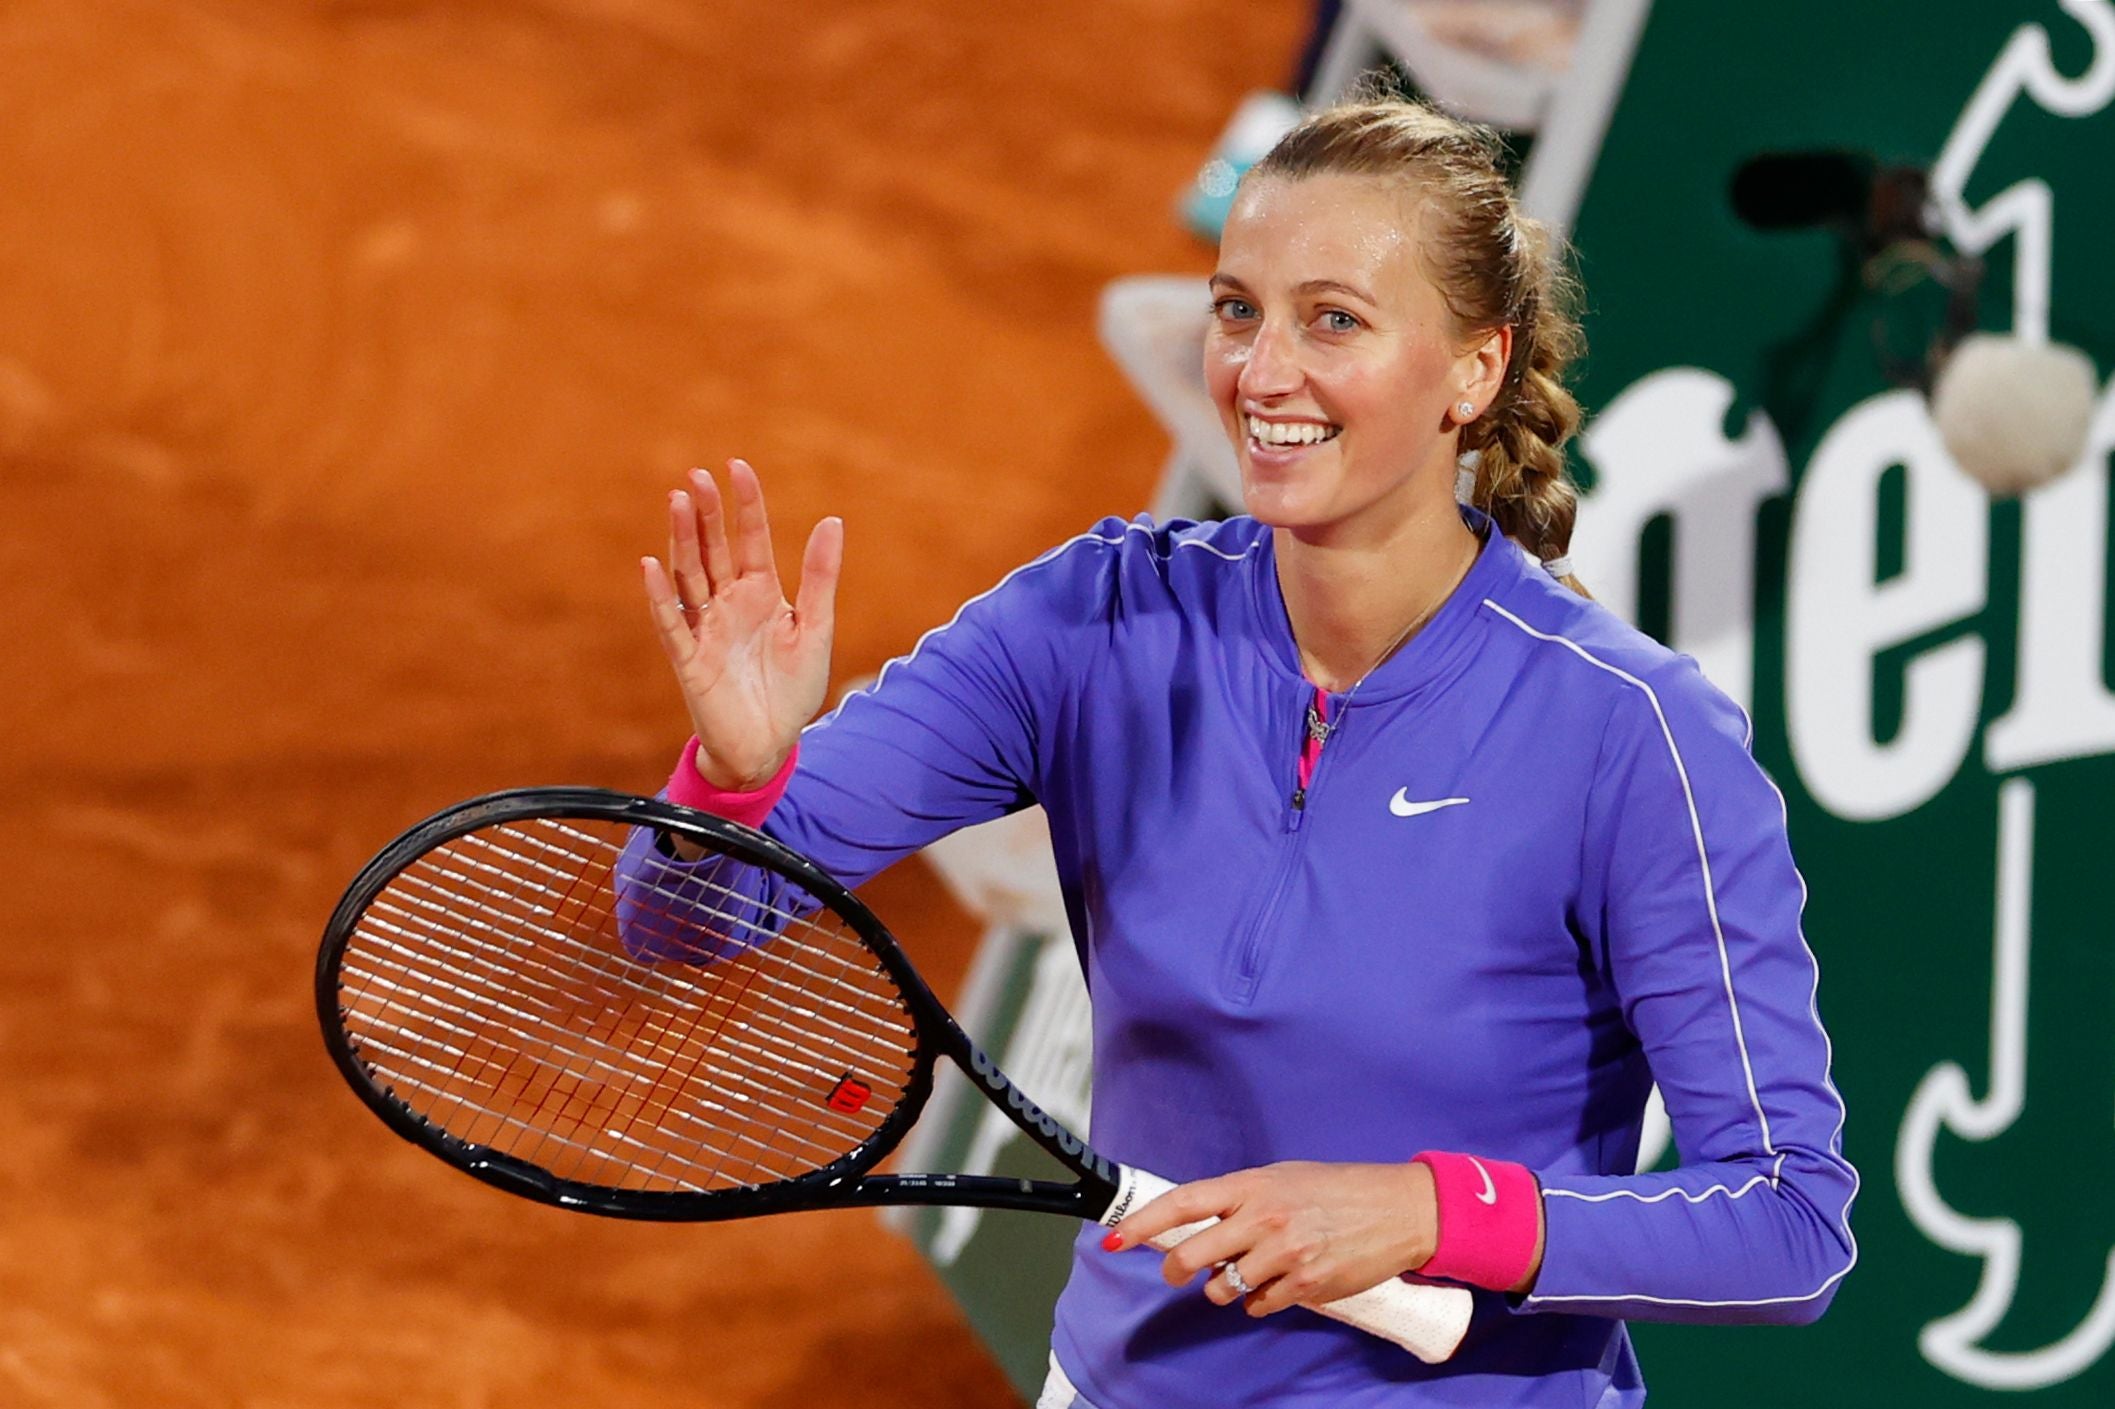 Petra Kvitova reached the fourth round of the French Open for the first time in five years